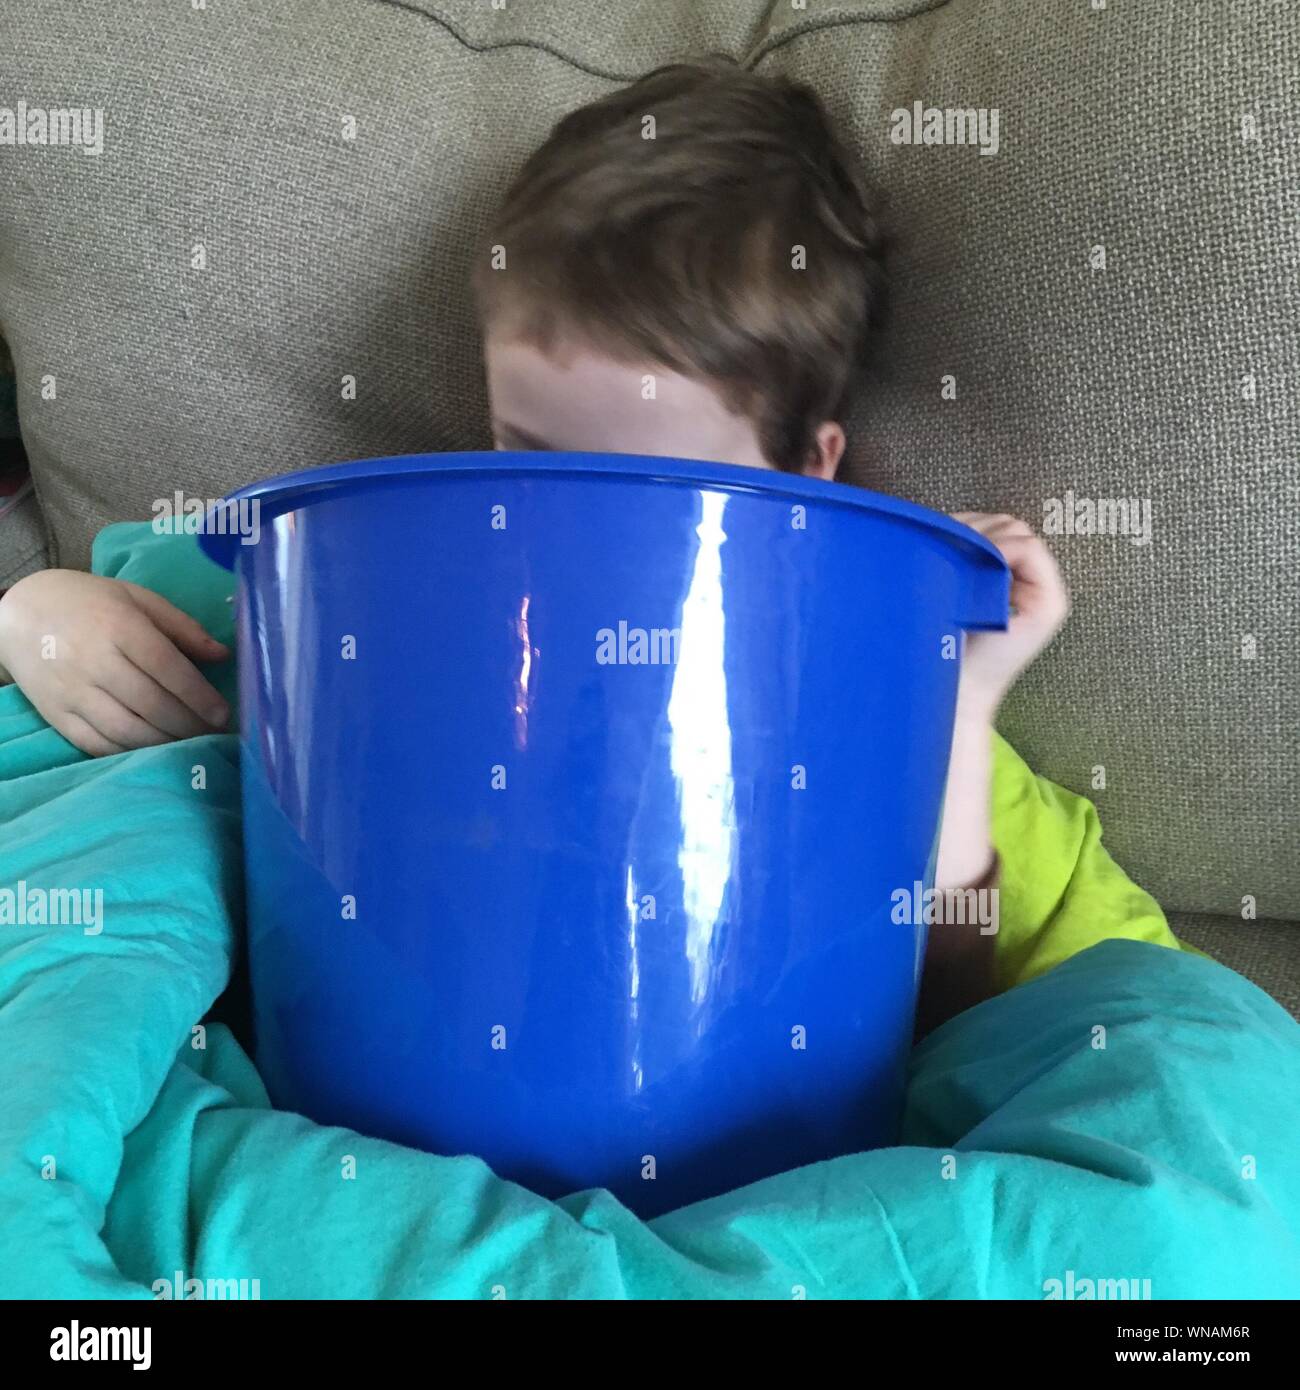 Sick Boy Vomiting In Bucket While Lying On Bed Stock Photo